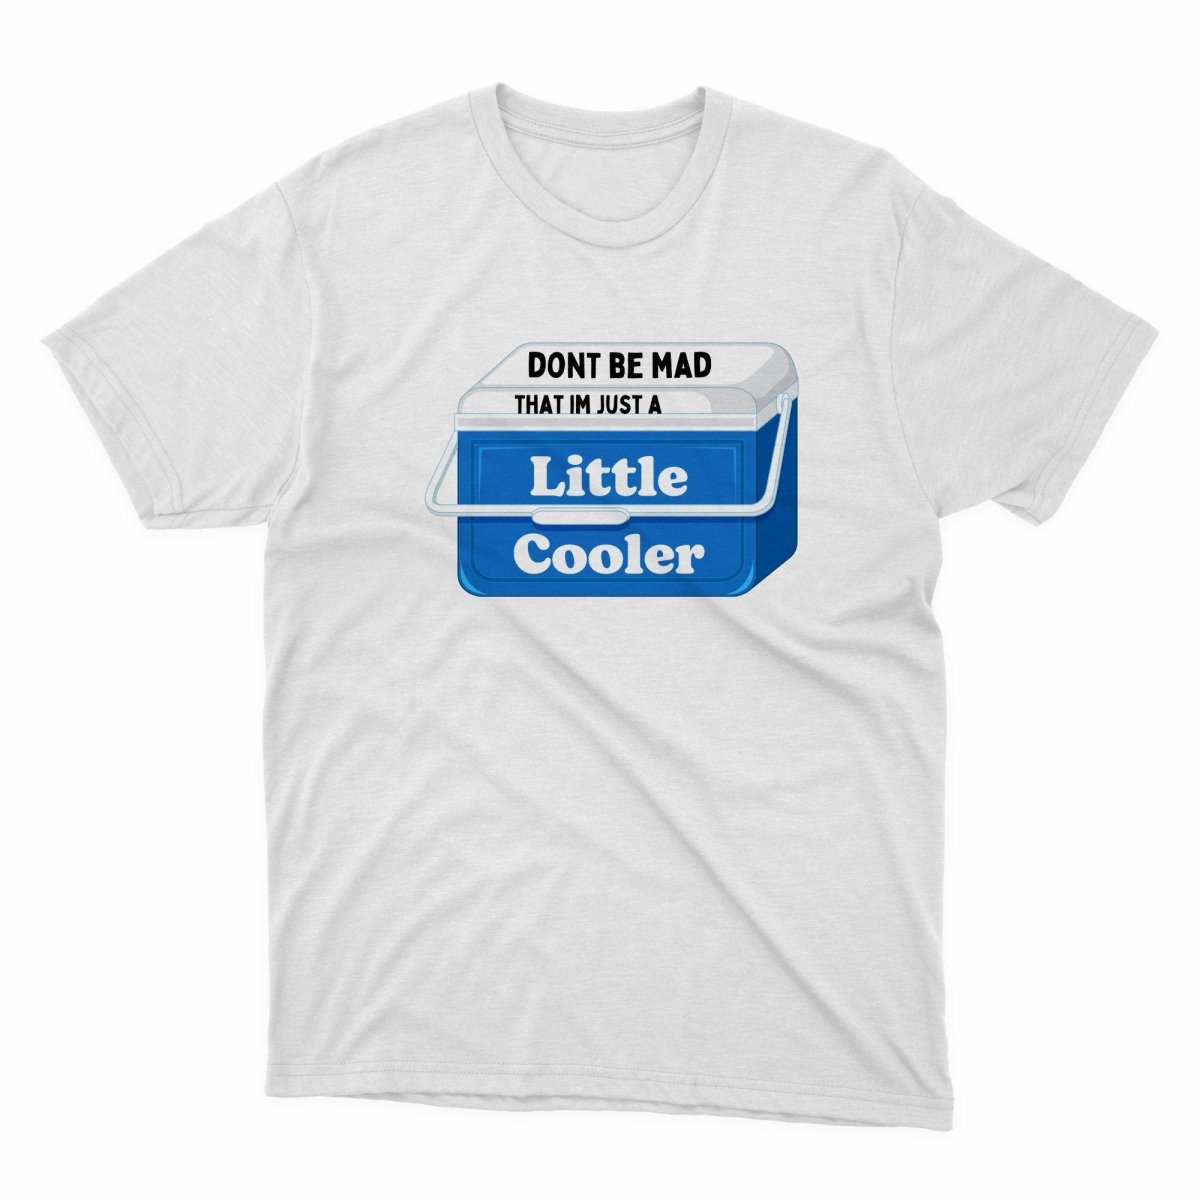 Don't Be Hate Me Because I'm A Little Cooler Shirt - stickerbullDon't Be Hate Me Because I'm A Little Cooler ShirtShirtsPrintifystickerbull72889992806146782880WhiteSa white t - shirt that says don't be mad that i'm